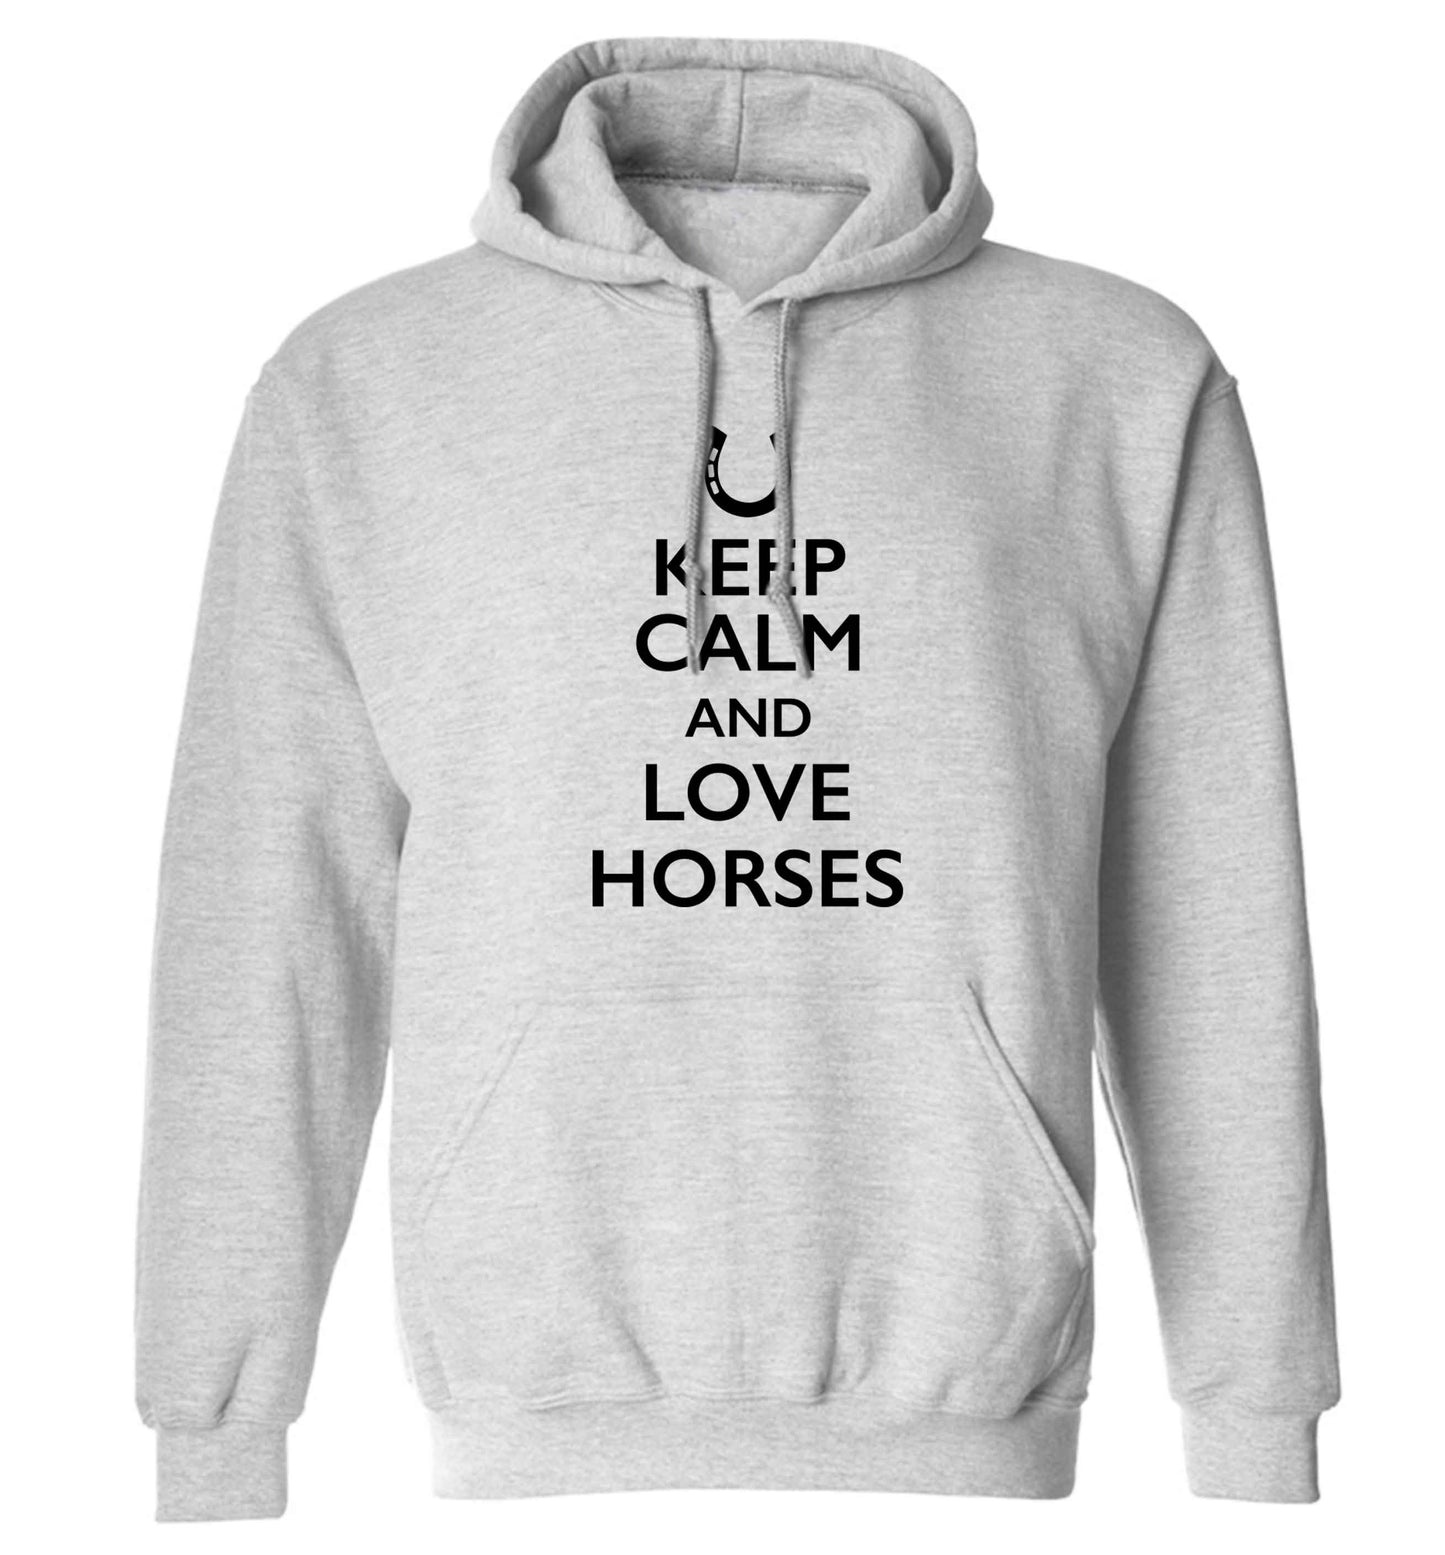 Keep calm and love horses adults unisex grey hoodie 2XL